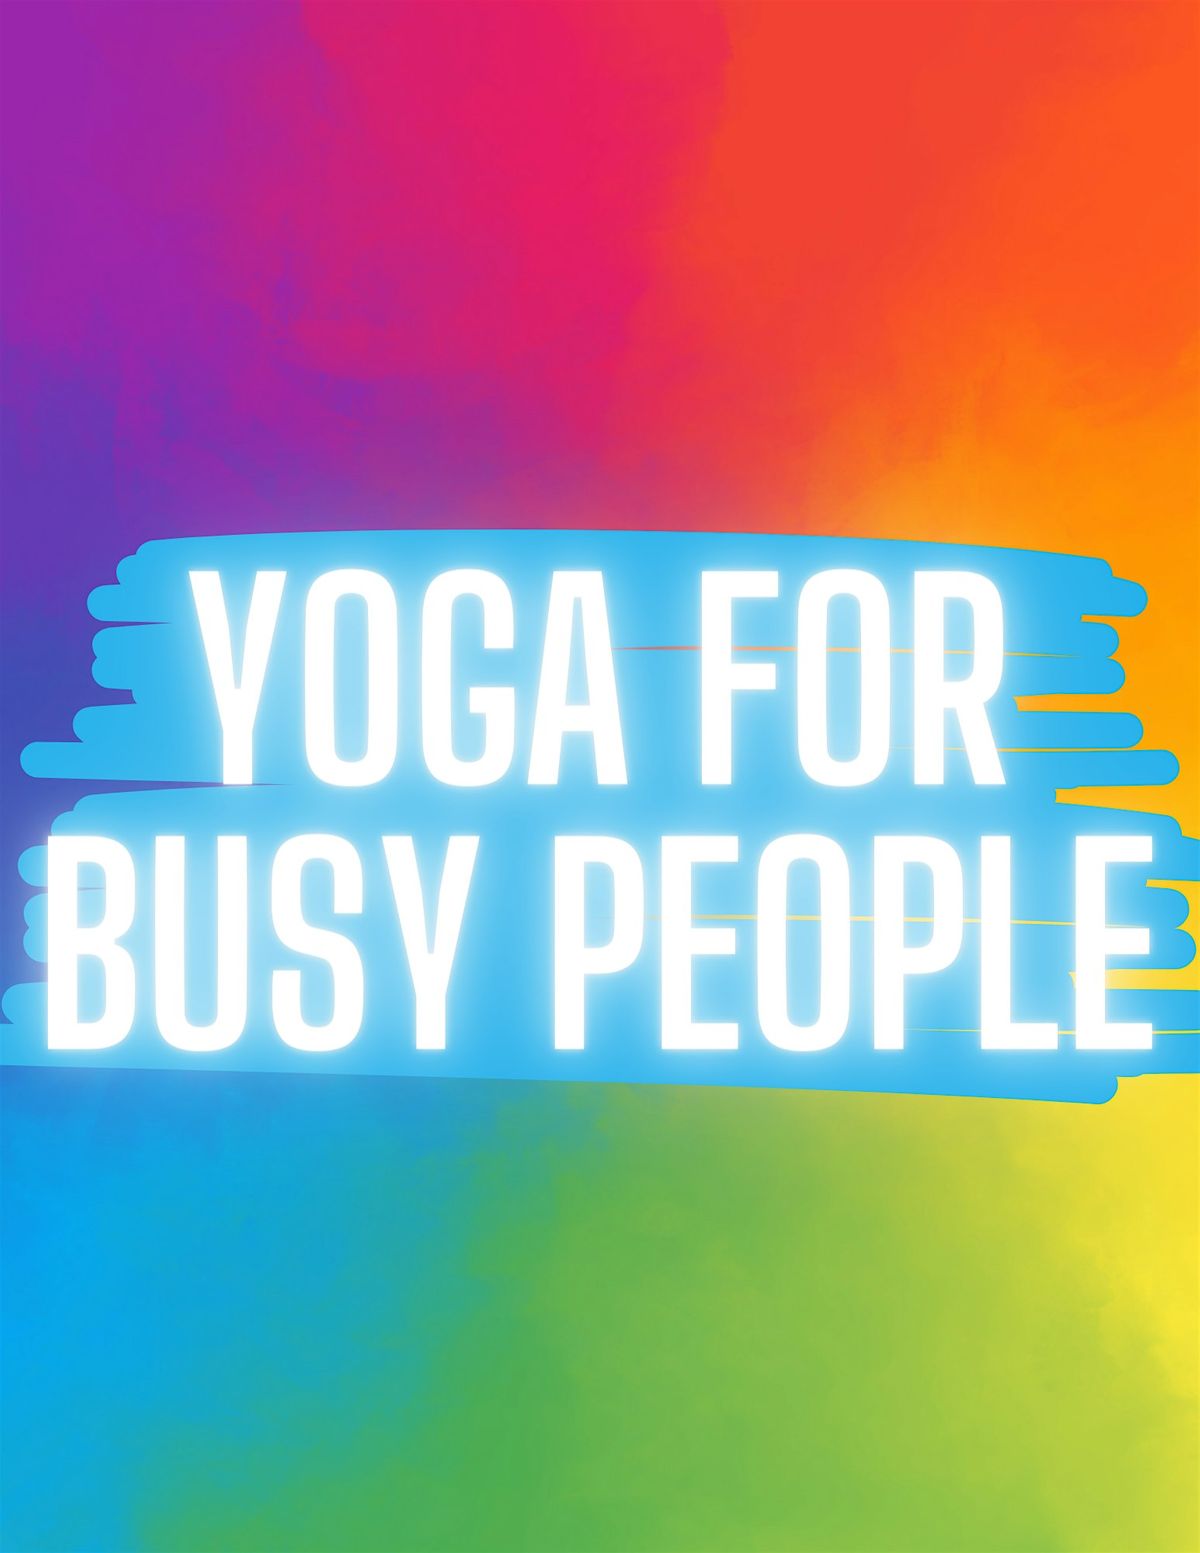 Yoga for Busy People - Weekly Yoga Class - Orlando